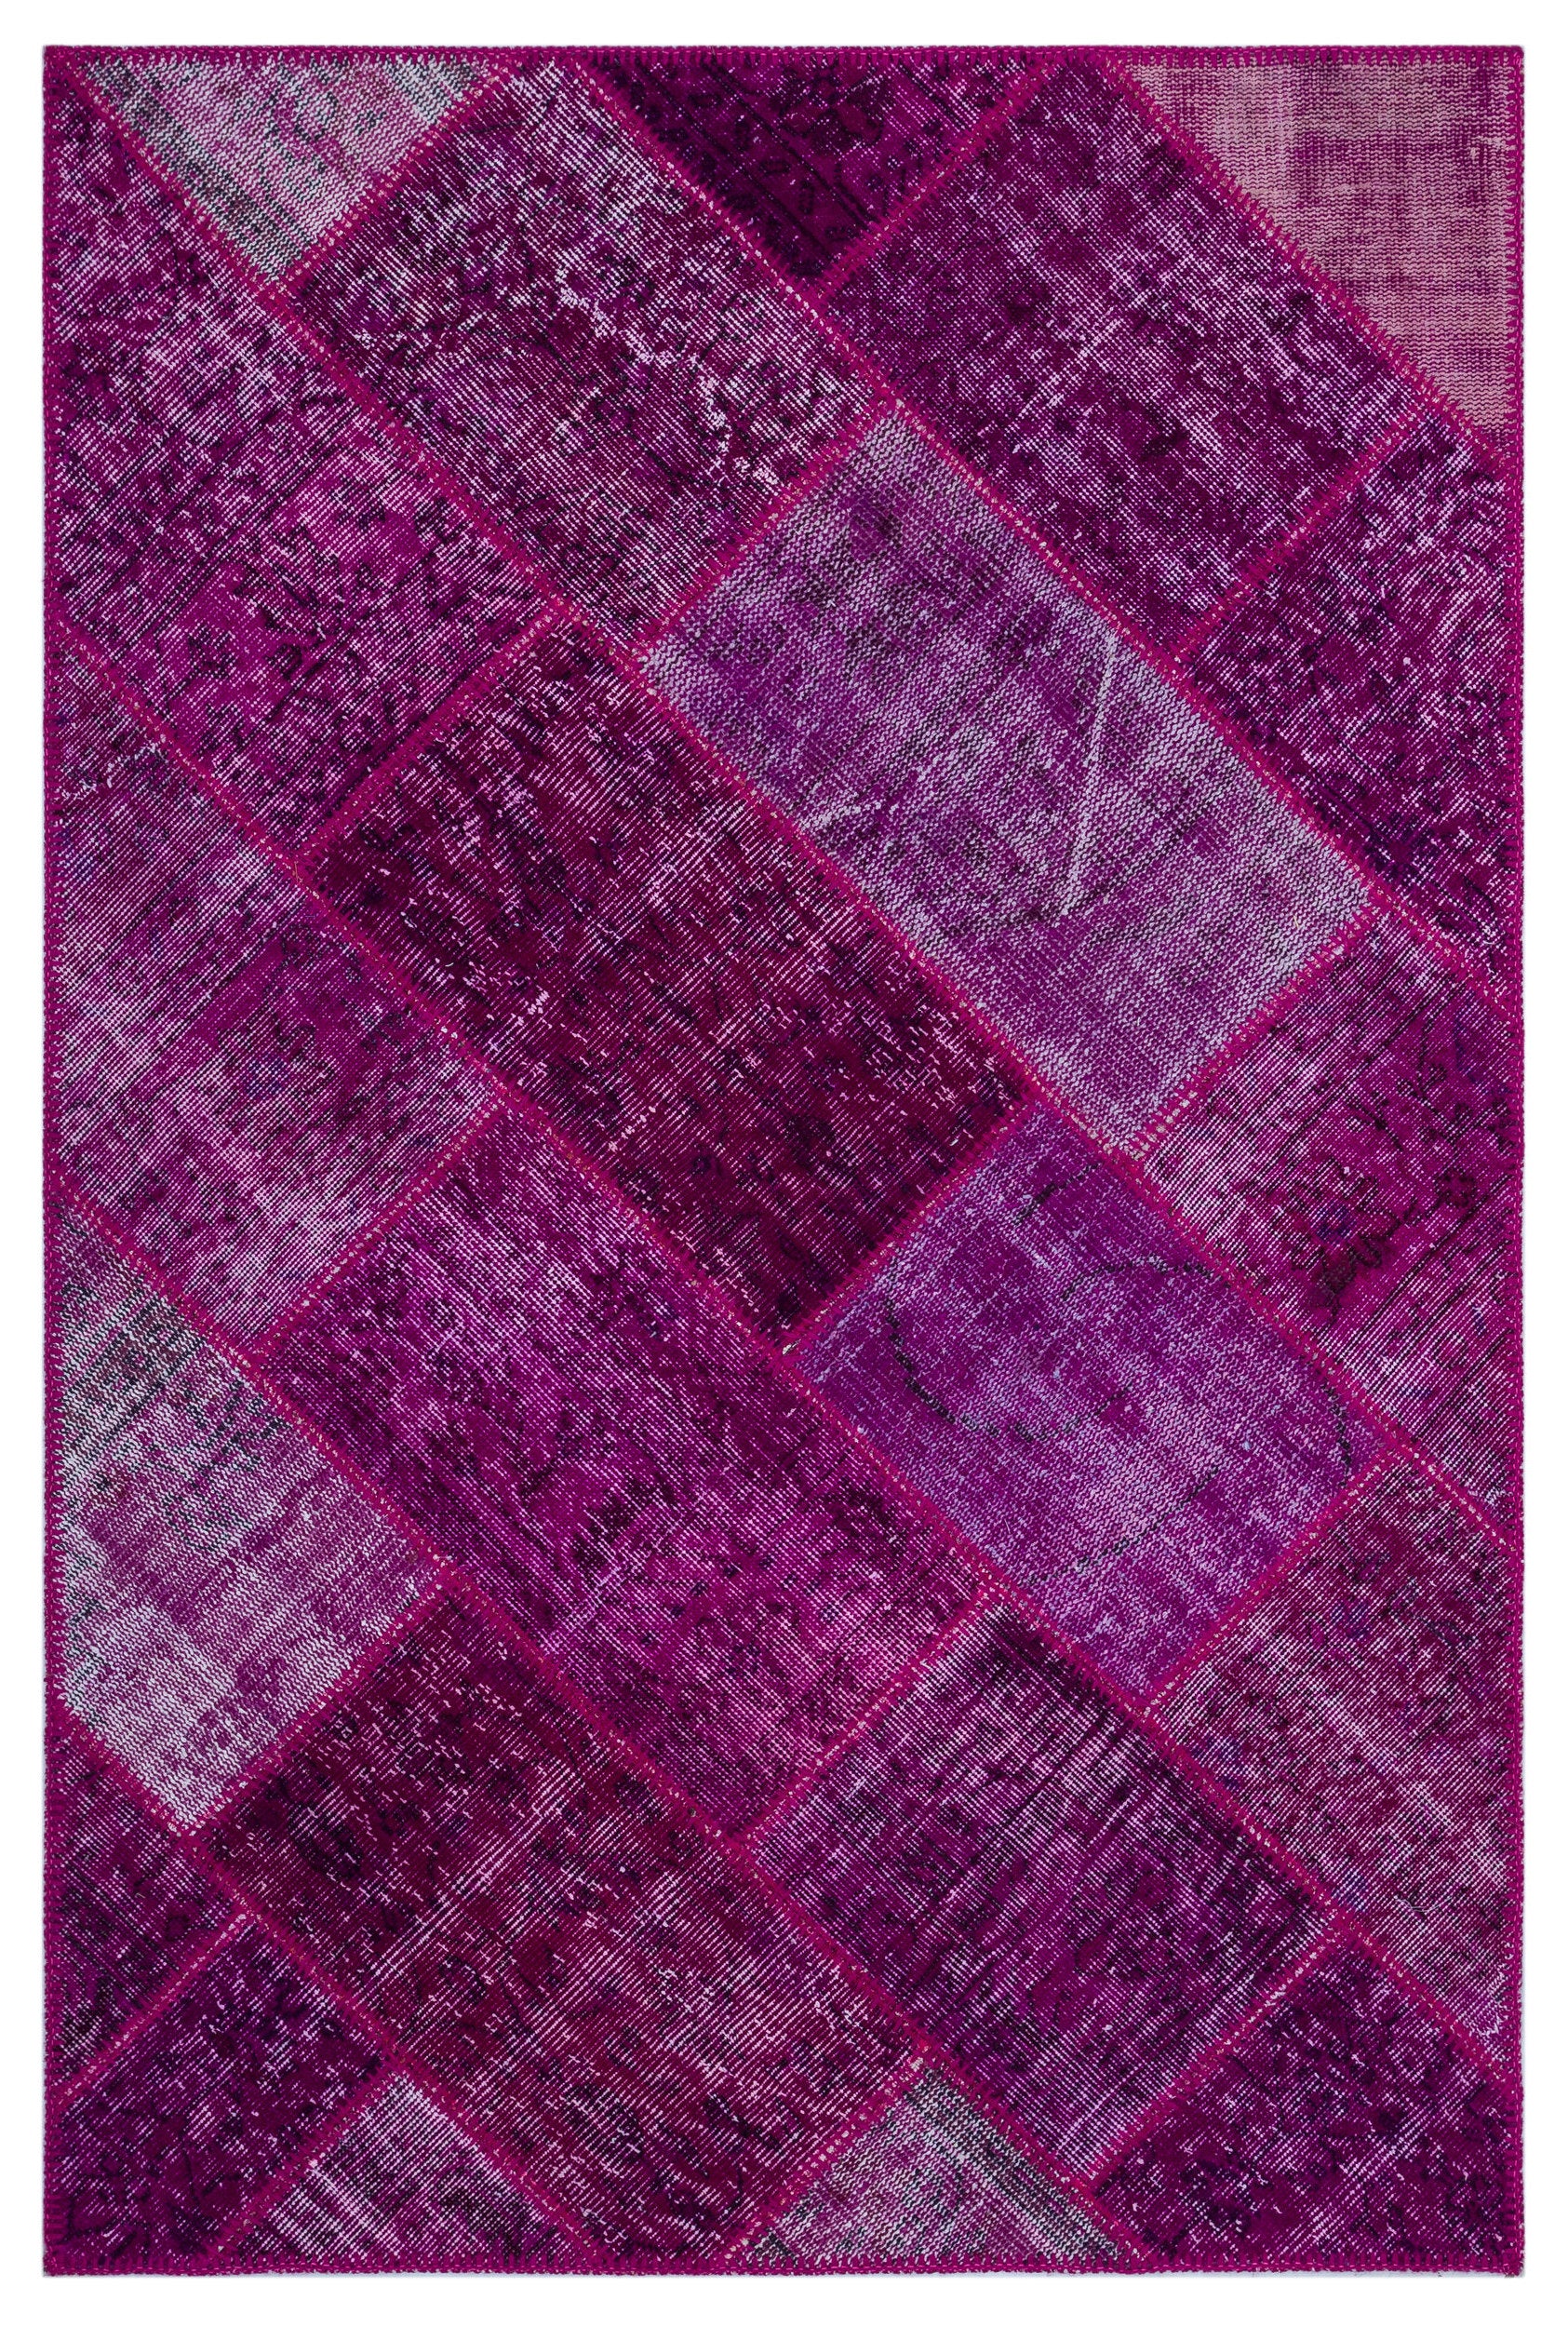 Fuchsia Over Dyed Patchwork Unique Rug 3'11'' x 5'11'' ft 120 x 180 cm